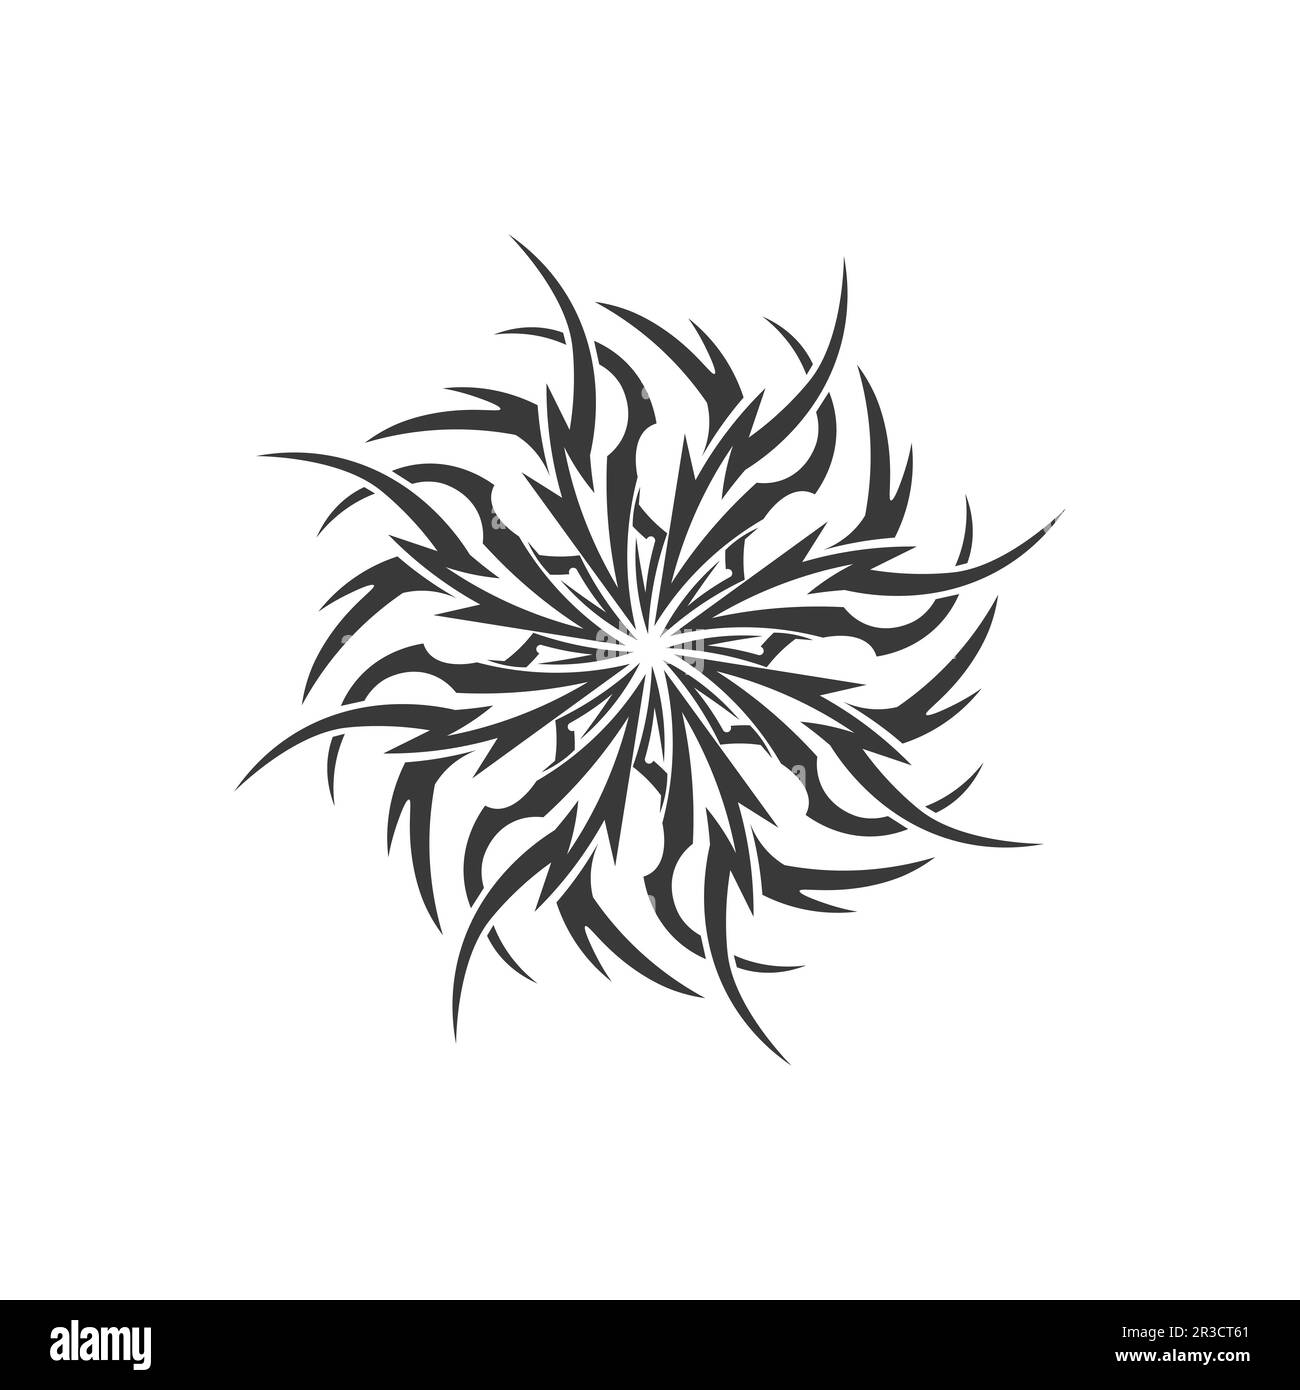 tribal pattern tattoo vector art design,tattoo tribal abstract sleeve, sketch art design isolated on white background,Simple logo. Stock Vector